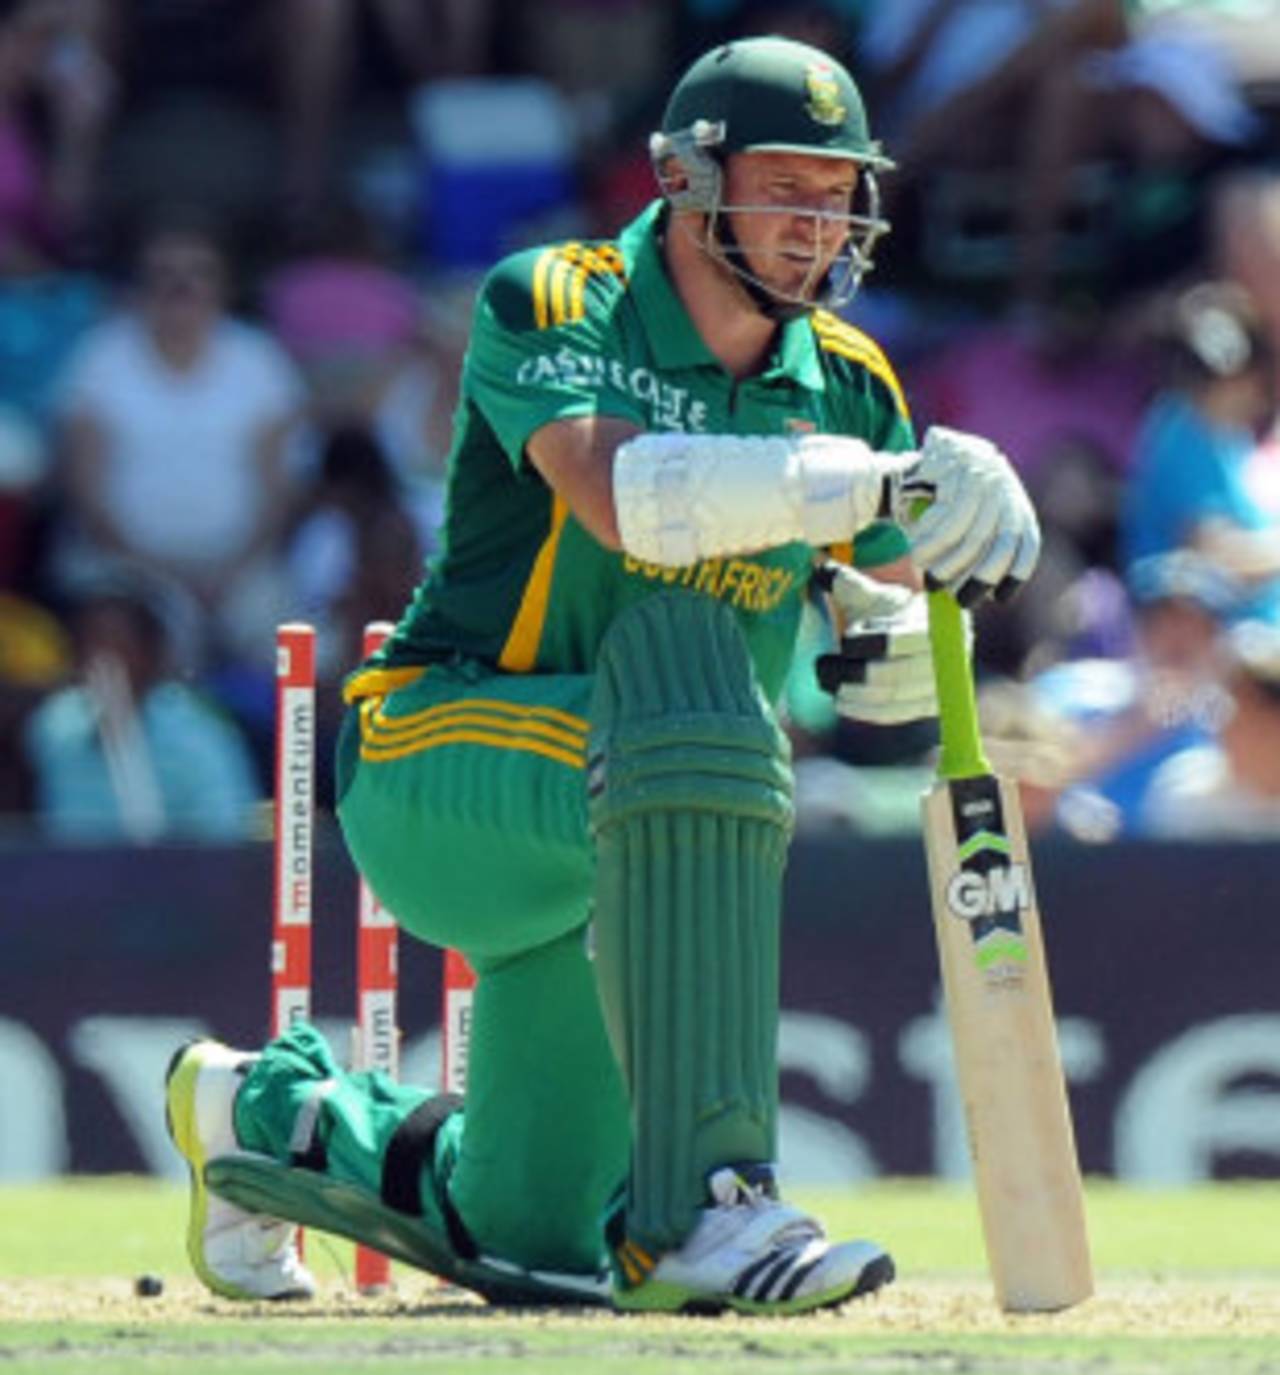 Graeme Smith on one knee after playing a shot, South Africa v Pakistan, 1st ODI, Bloemfontein, March 10, 2013